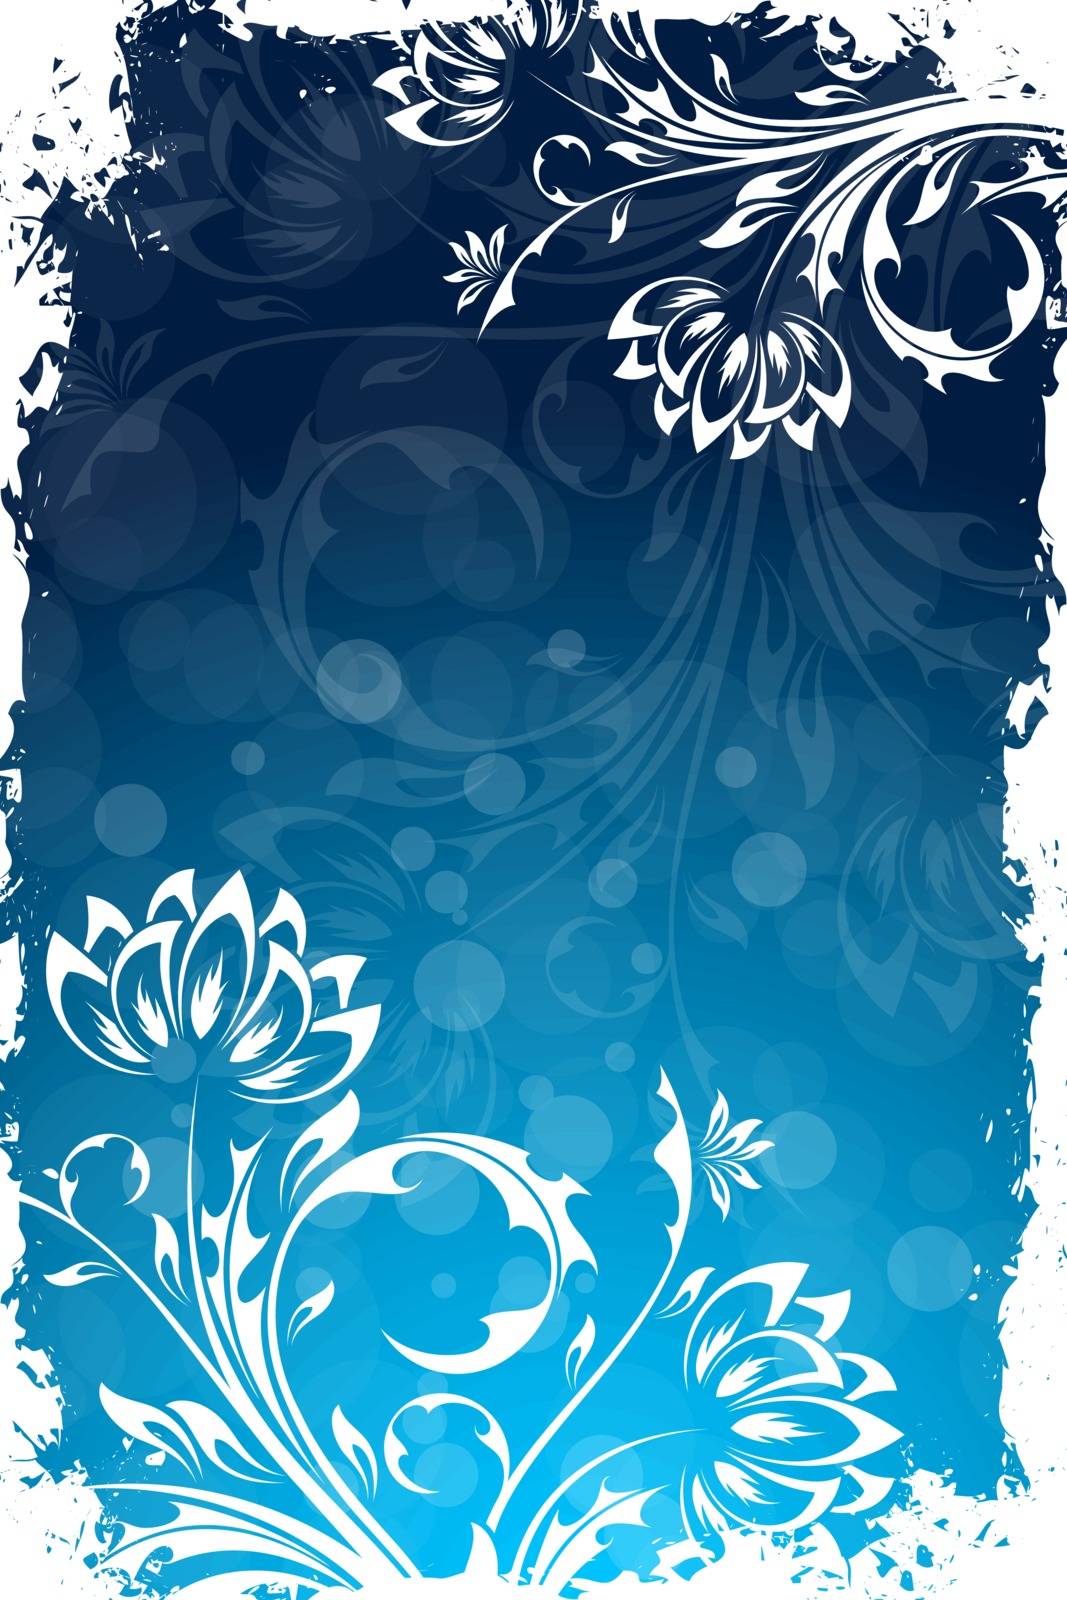 Grungy Floral Background by WaD